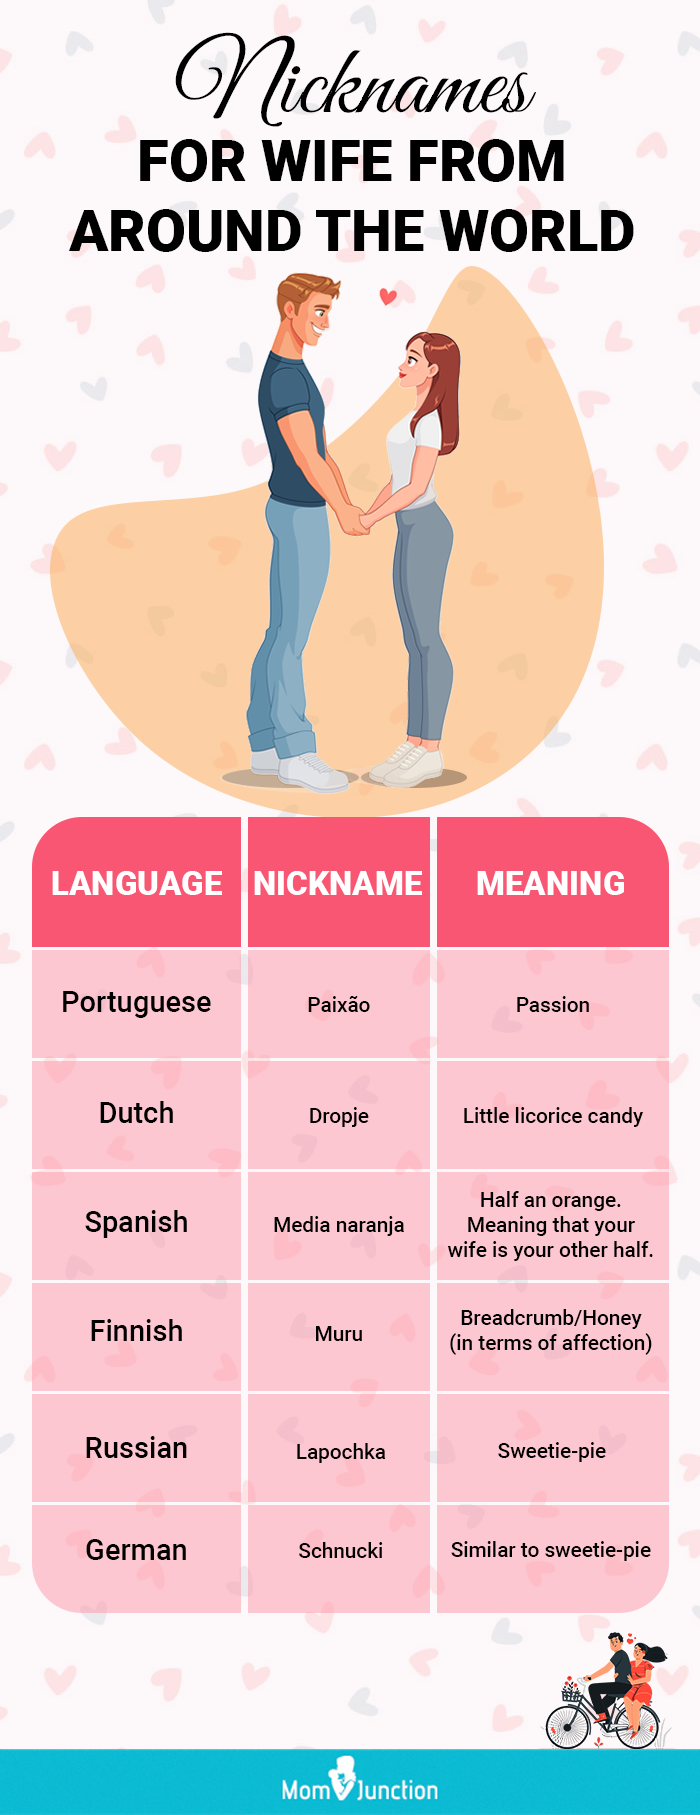 nicknames for wife from around the world [infographic]